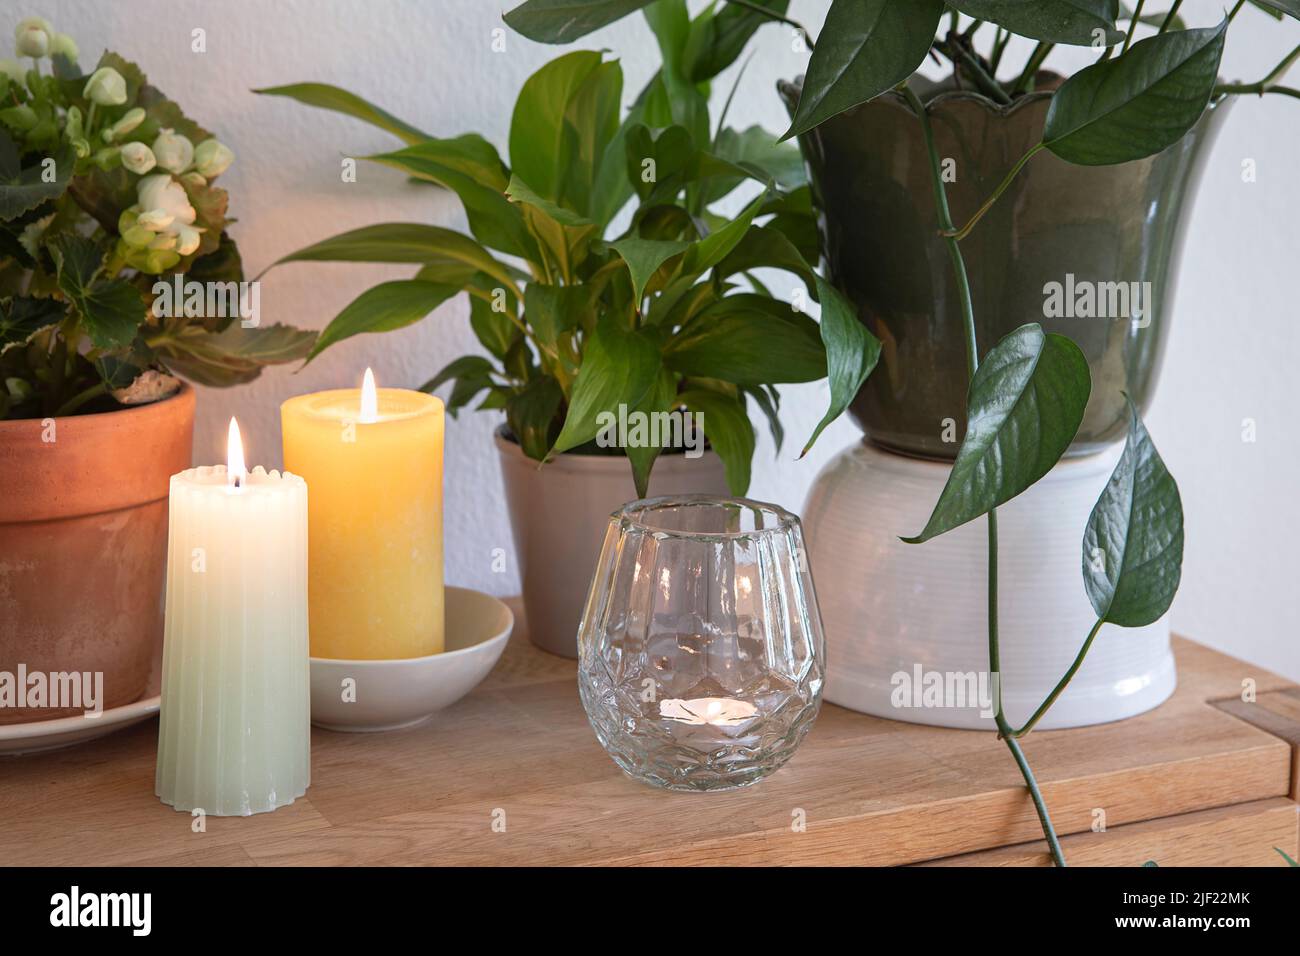 Green leaves of house plants and candles, cozy elegant home interior decoration arrangement. Stock Photo